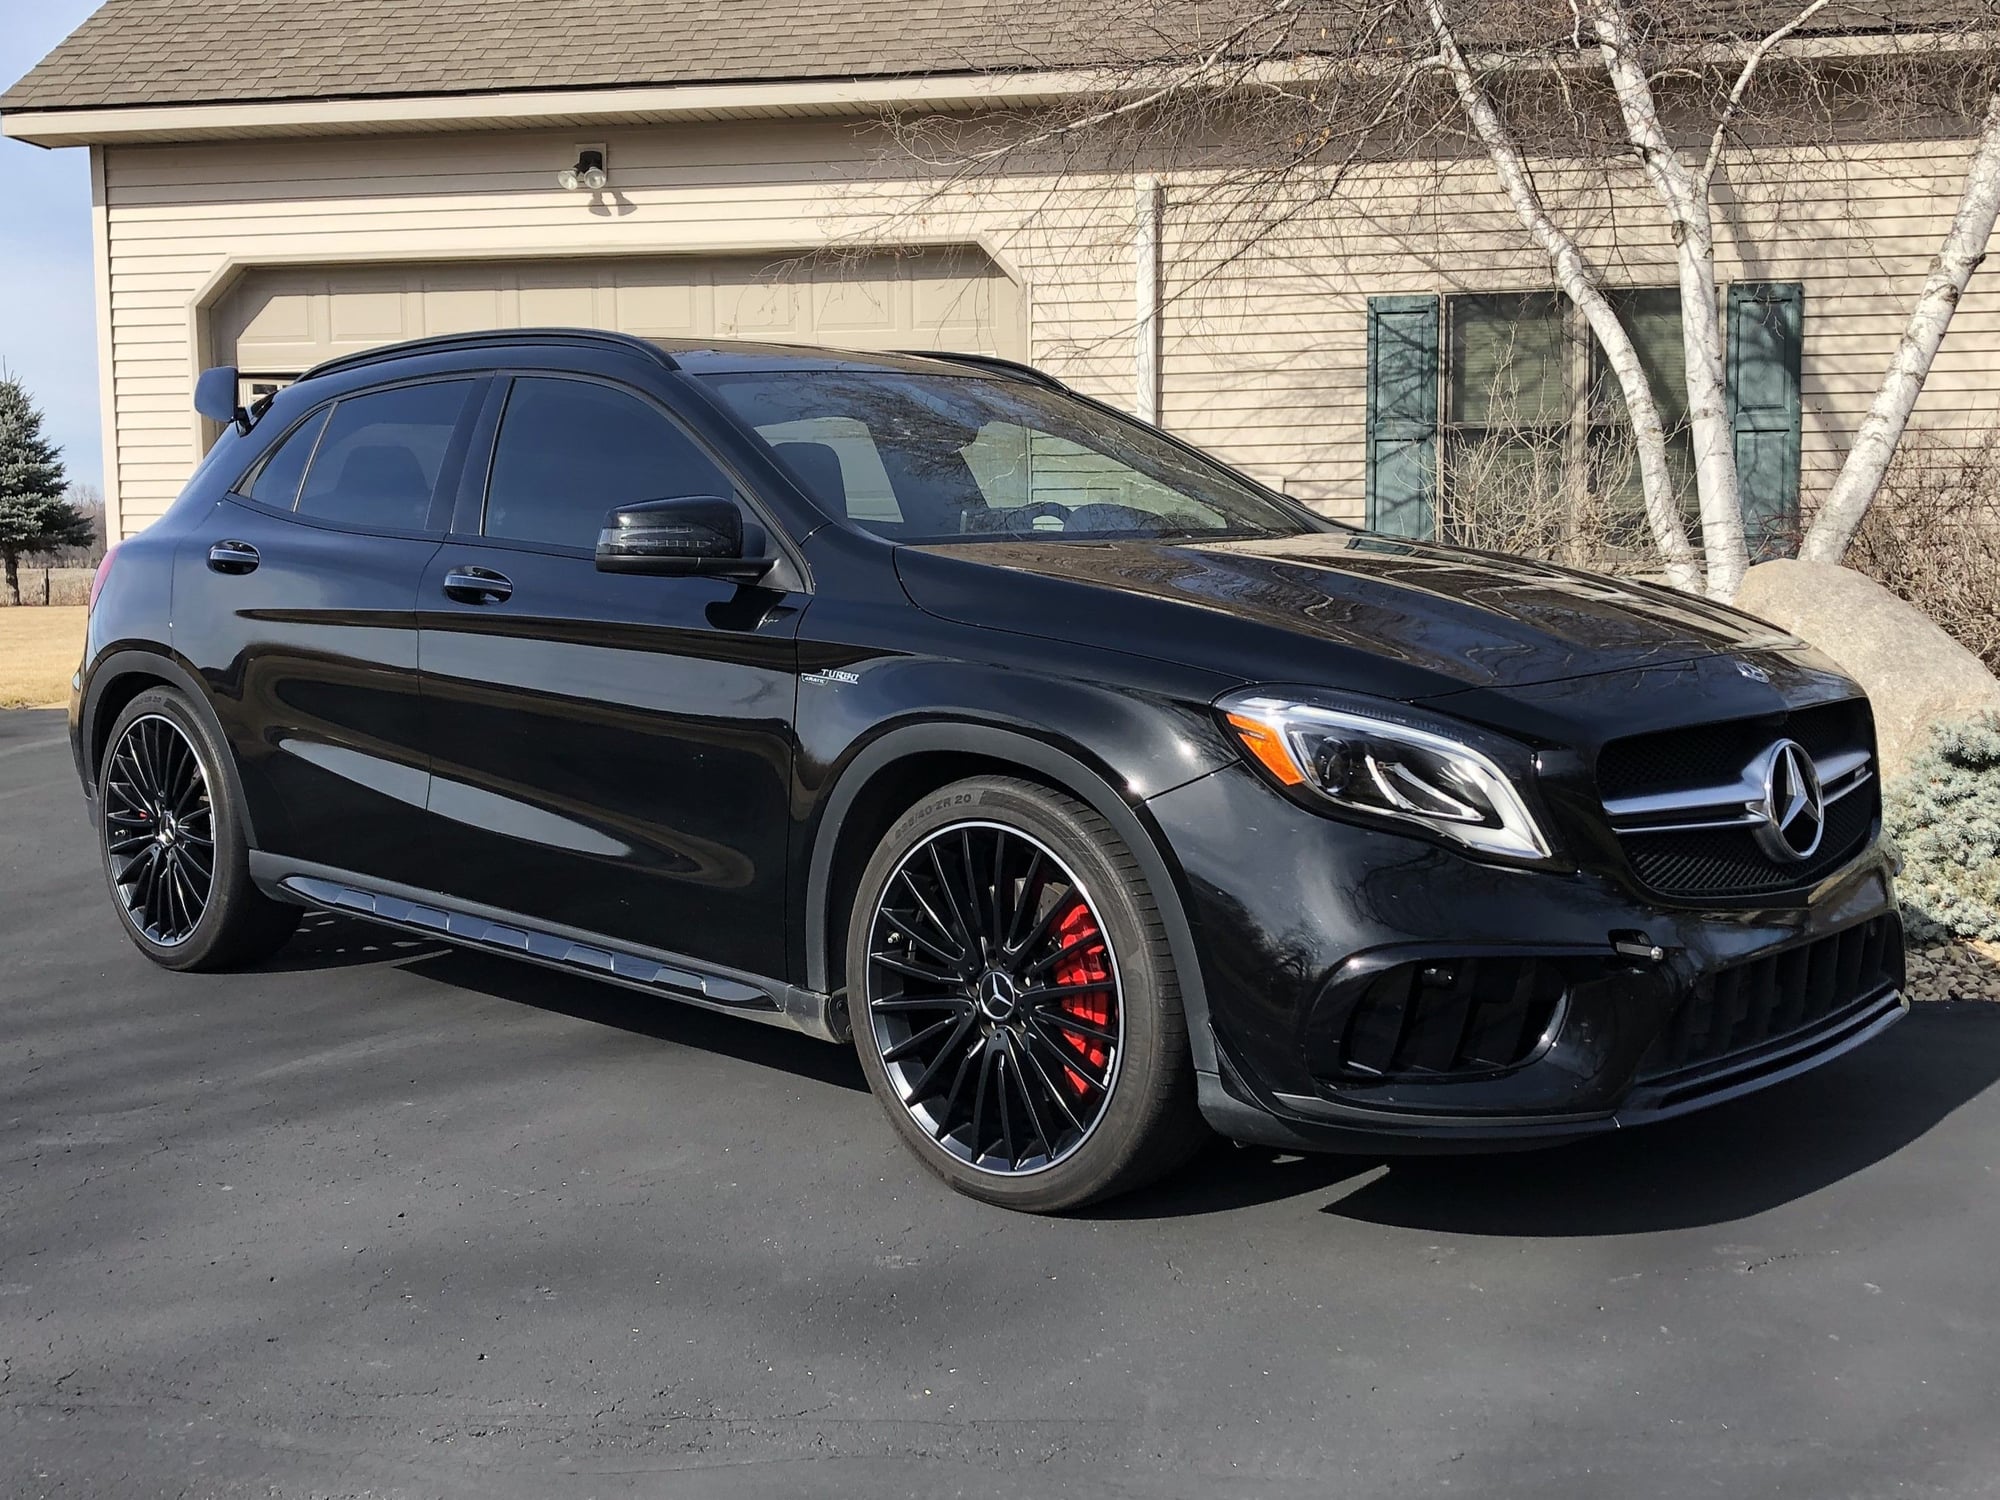 2018 Mercedes-Benz GLA45 AMG - 2018 AMG GLA45 For Sale - Low Miles - One Owner - Used - Rogers, MN 55374, United States